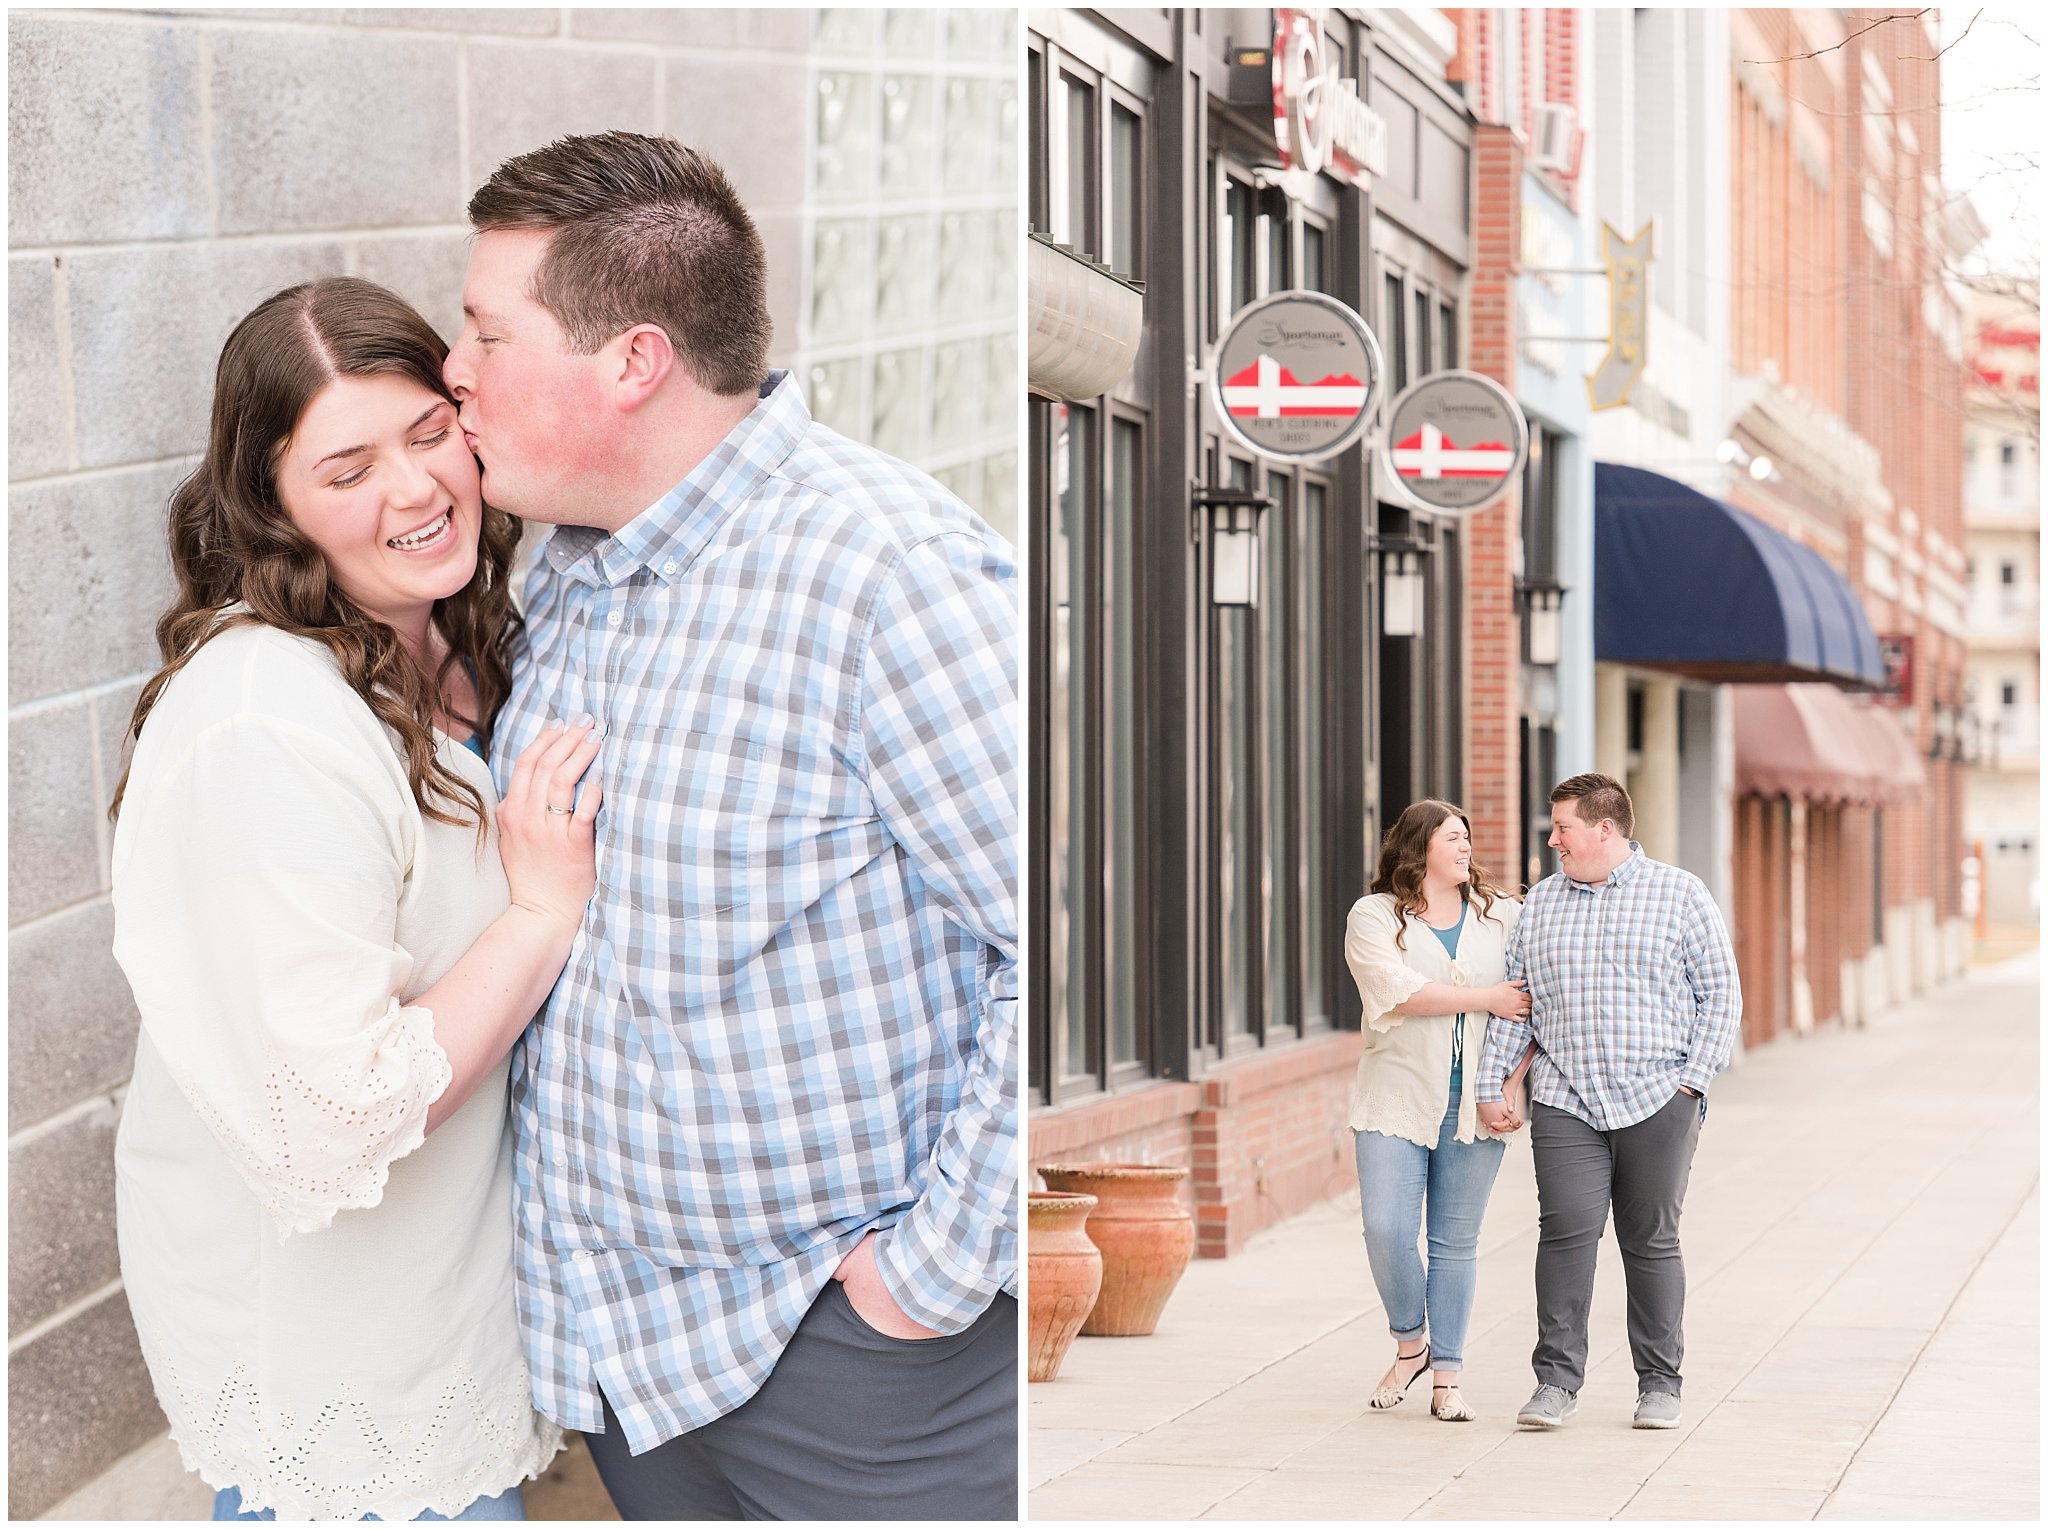 Couple dressed in light blue and white urban engagements | Downtown Logan and Green Canyon Engagements | Utah Wedding Photographers | Jessie and Dallin Photography